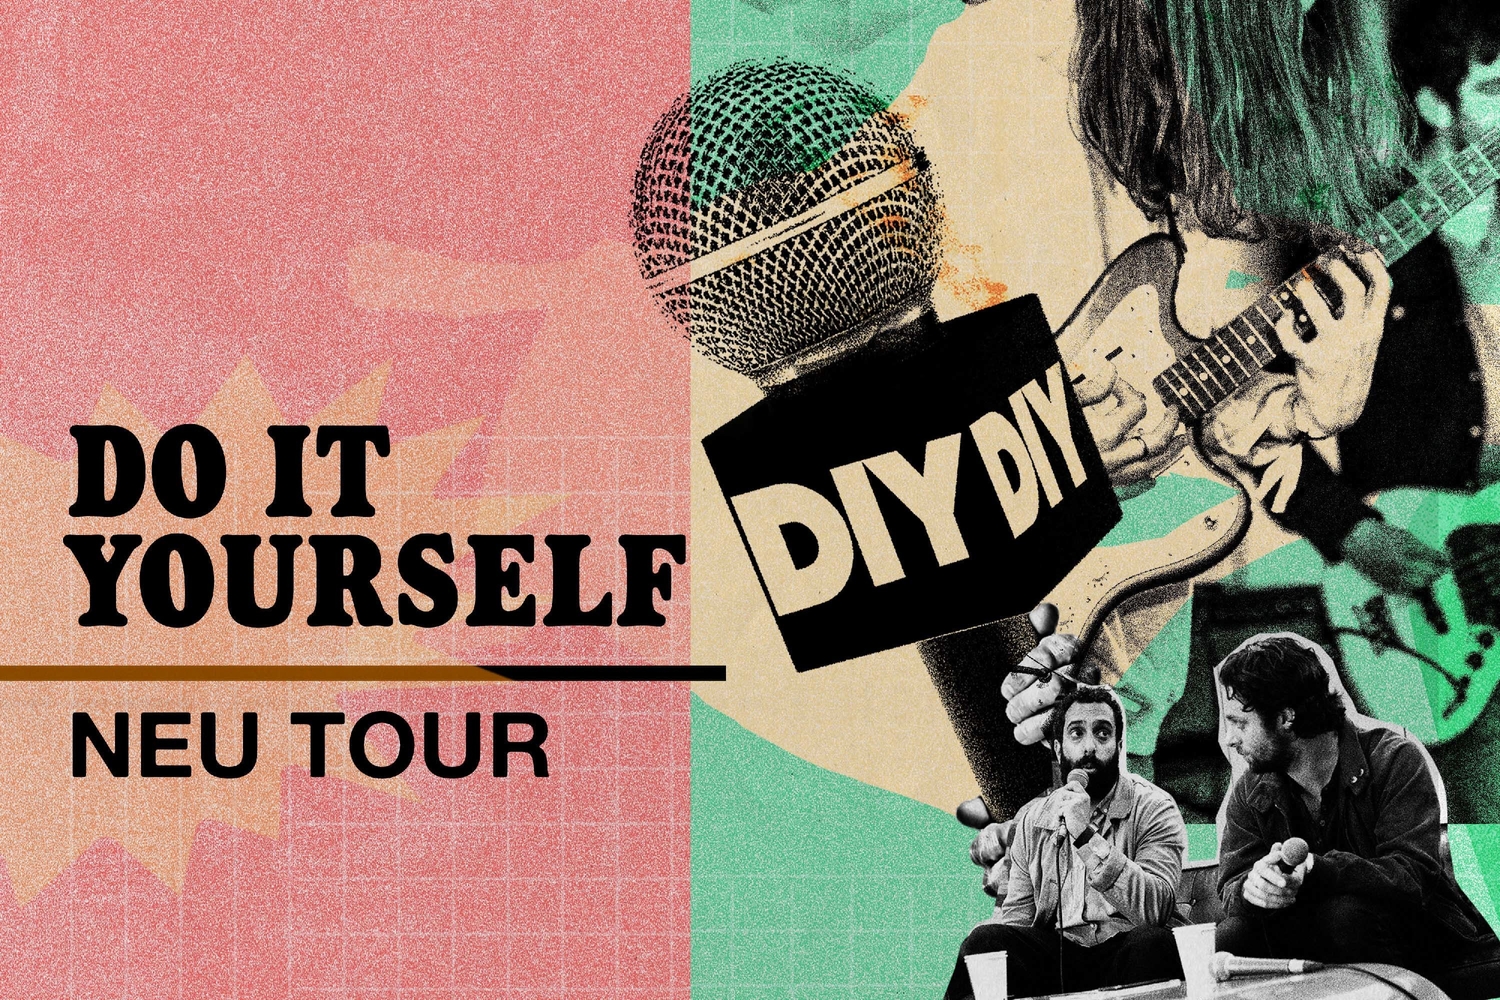 Announcing DIY’s Do It Yourself Neu Tour - coming to a city near you next month!